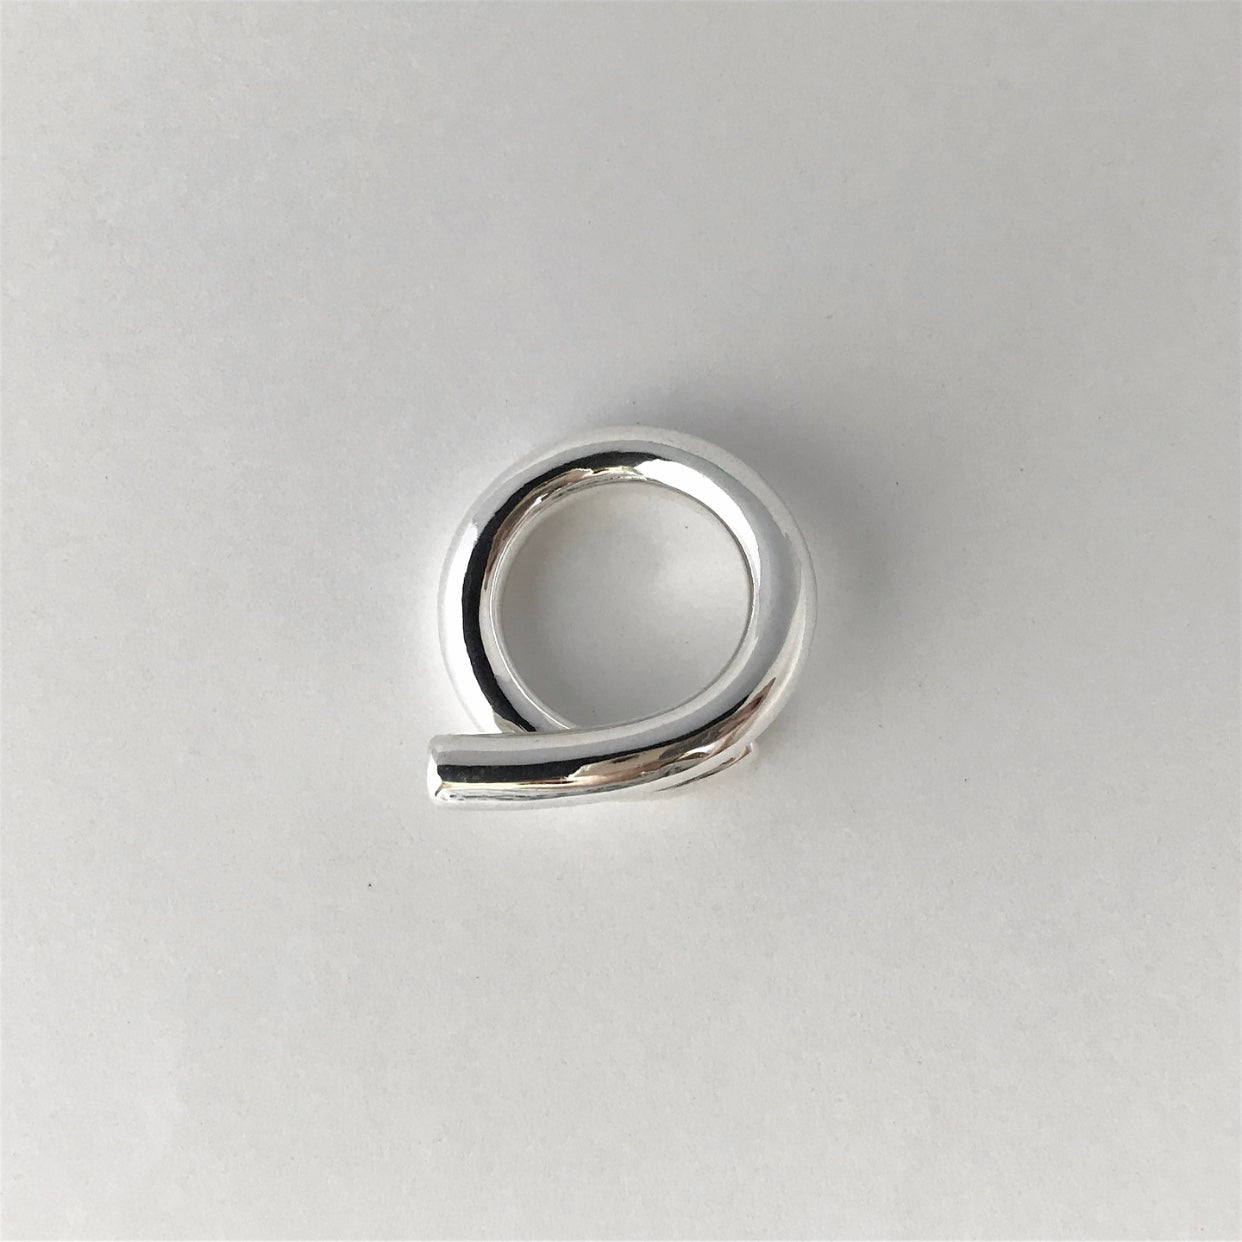 Trace ring